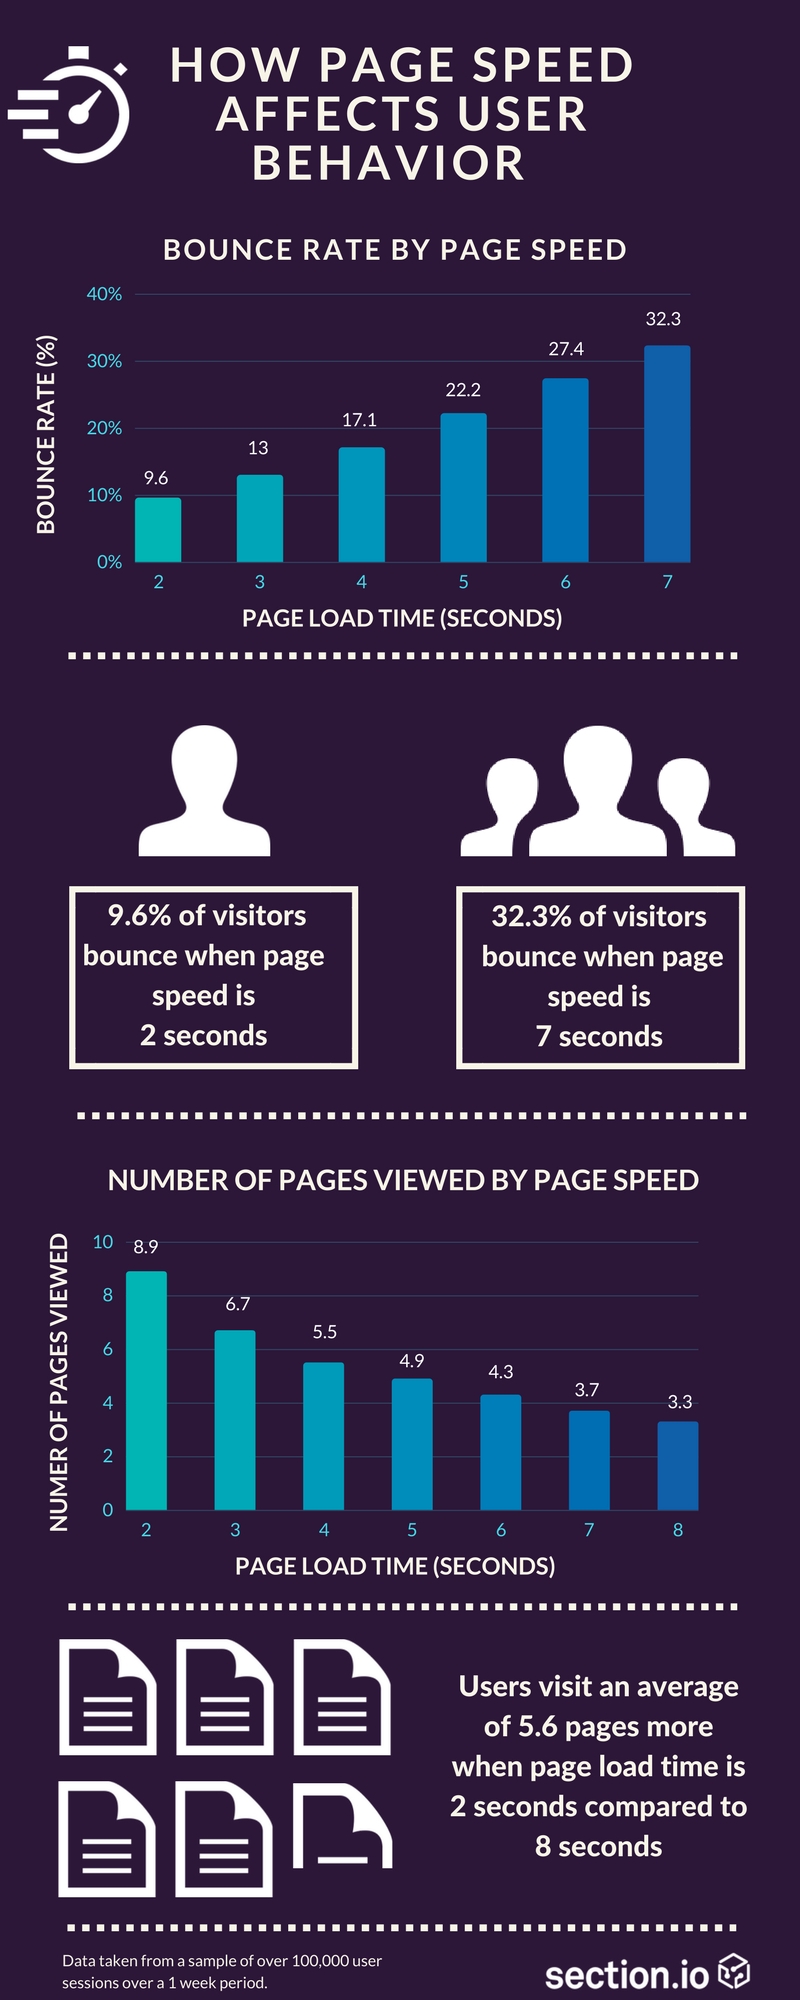 An infographic on page load speed and its effects